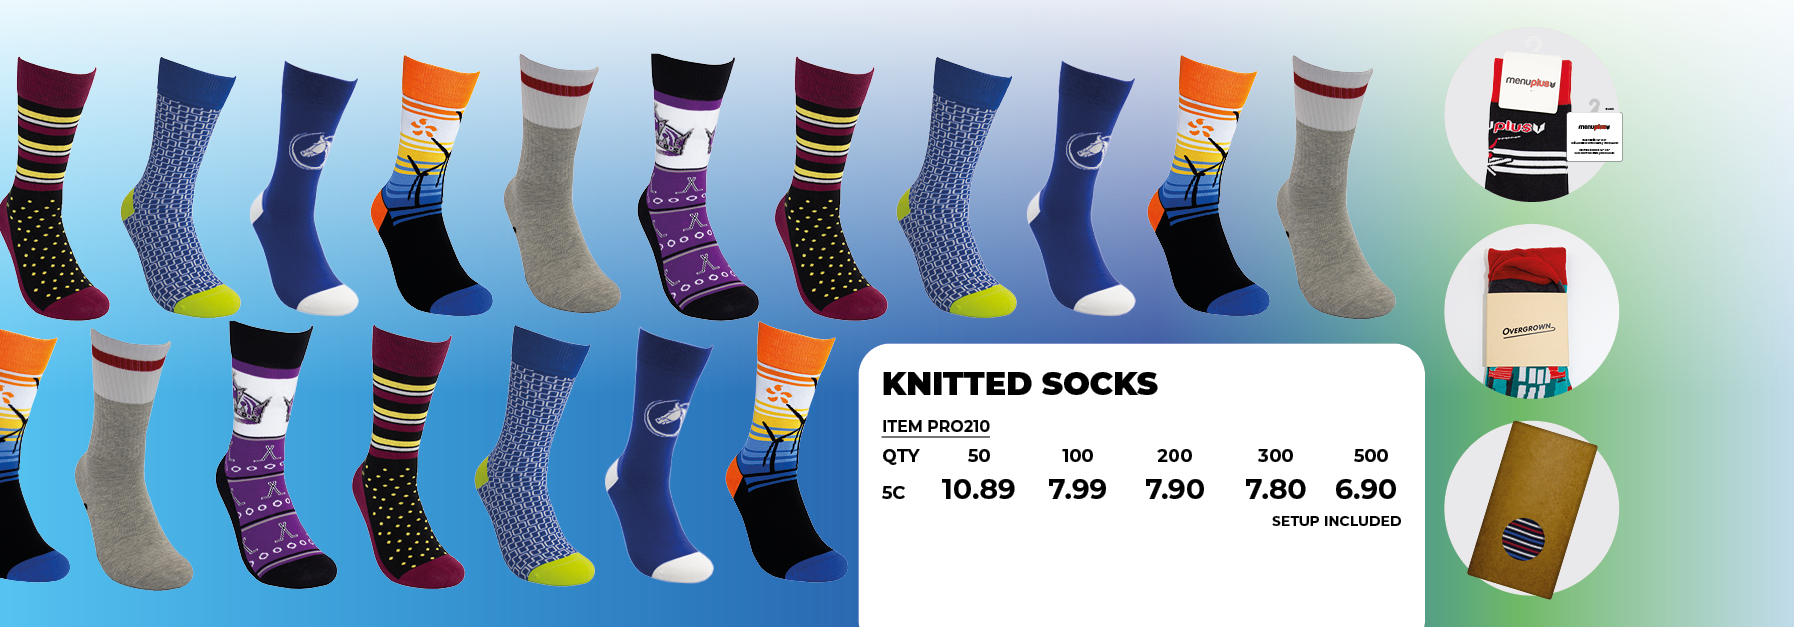 Knitted socks prices